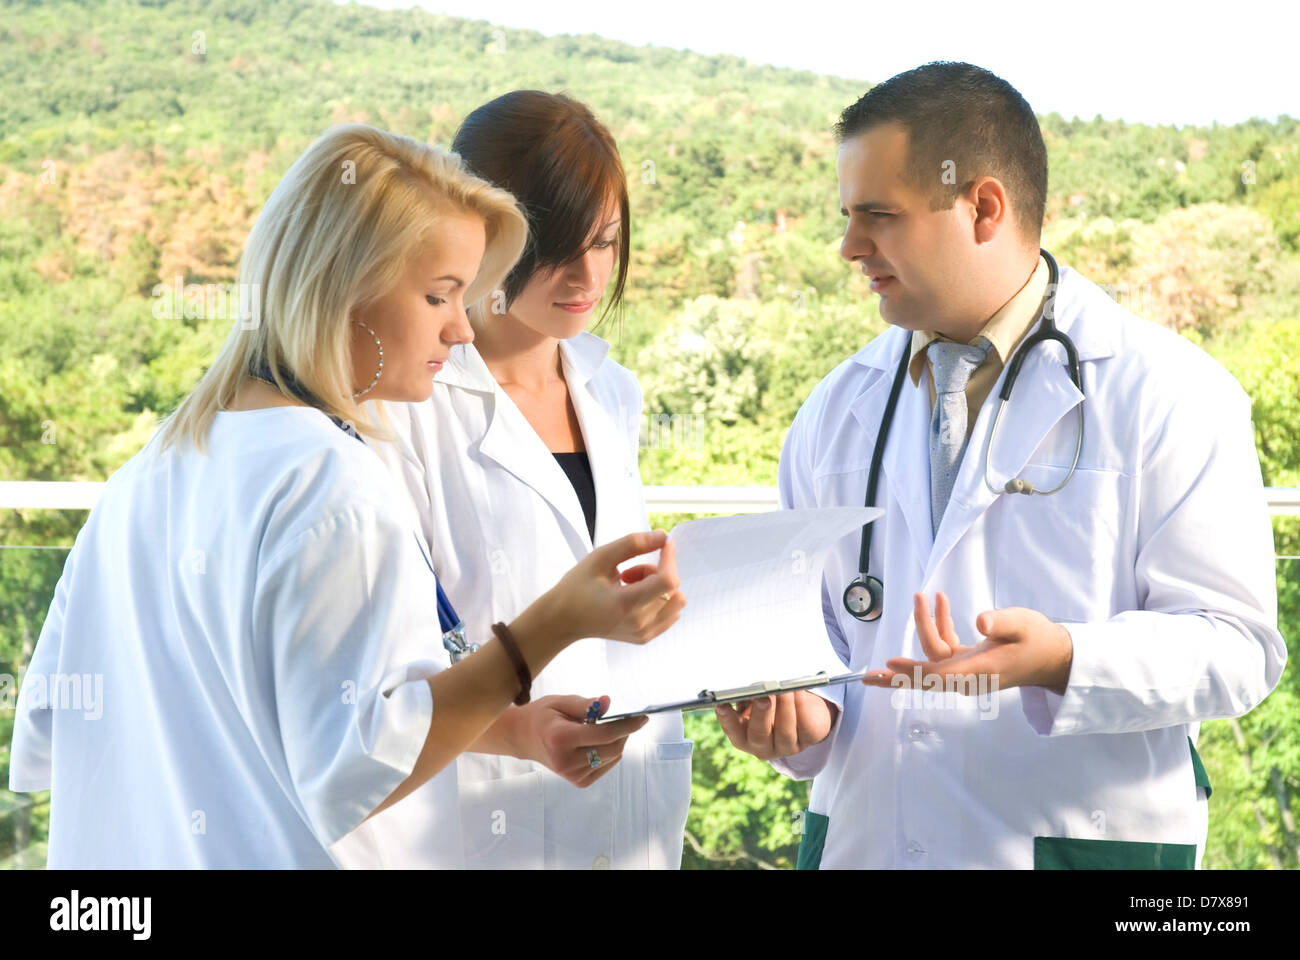 A doctor and nurses talking on the terrace Stock Photo